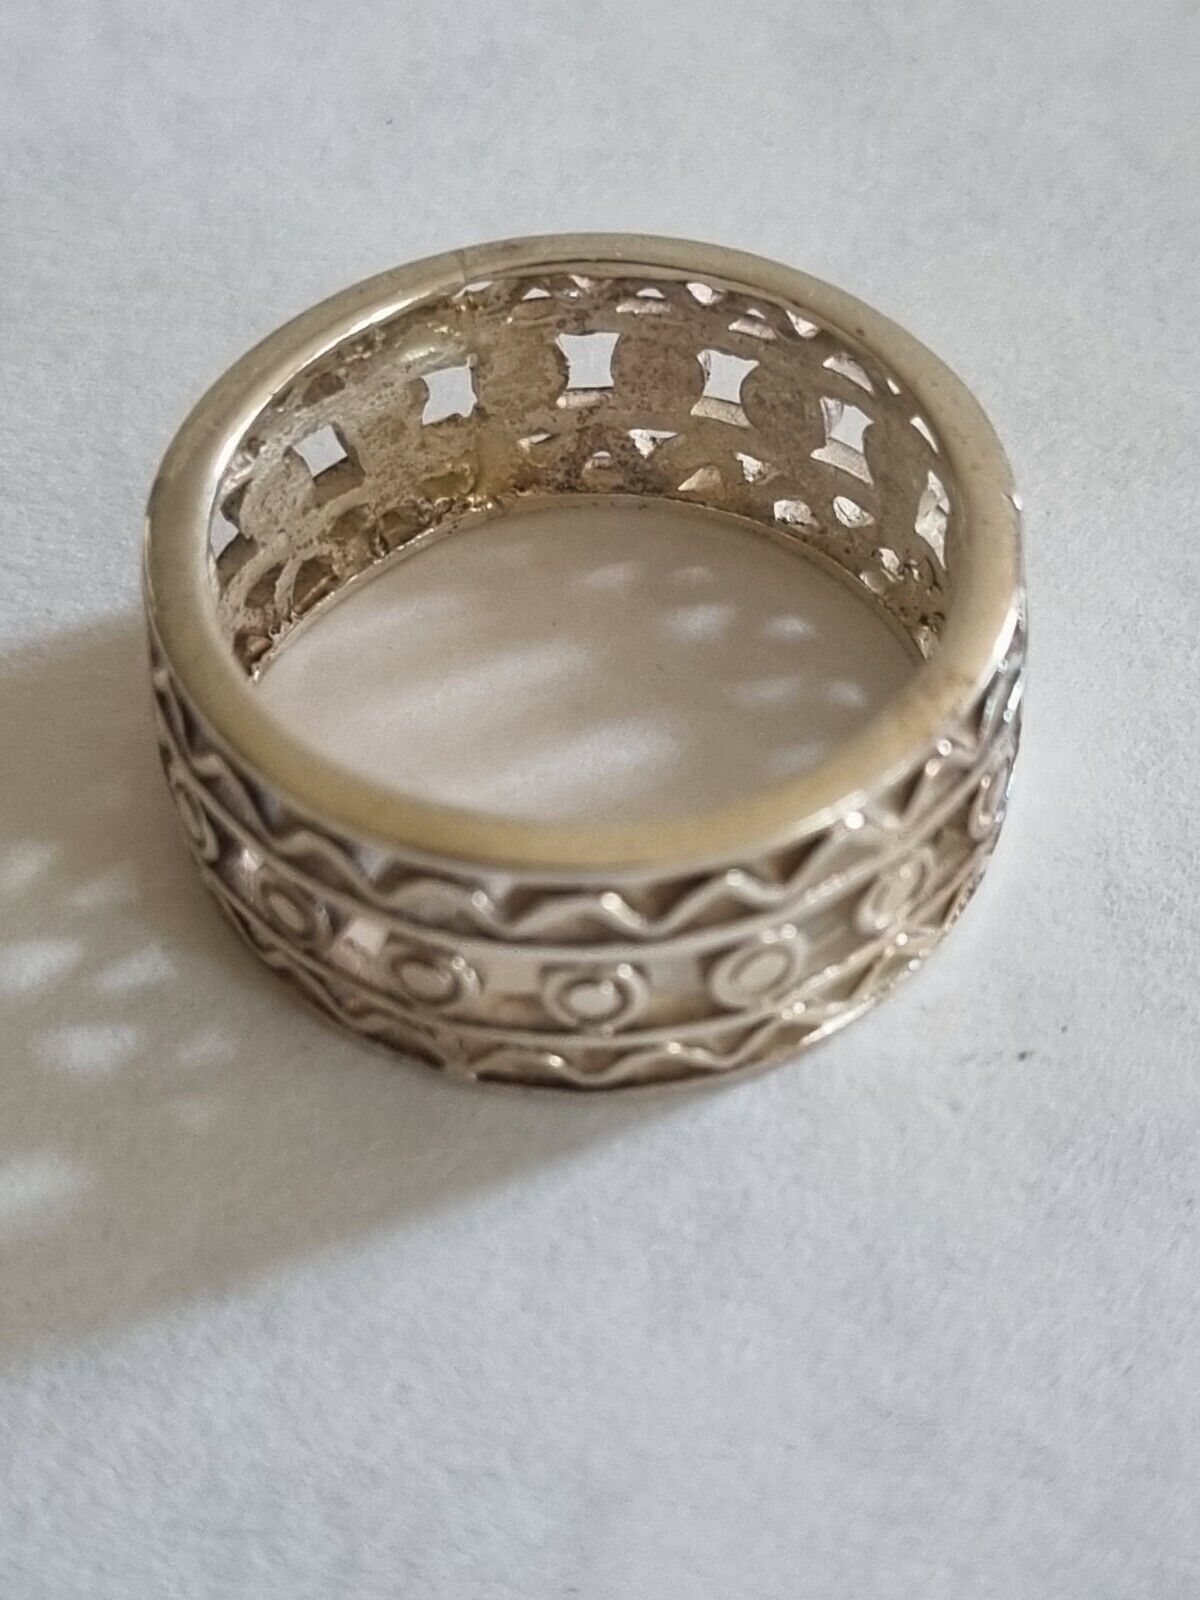 RING Decorative Band FILIGREE Scroll pattern Sterling Silver band size 10 WIDE